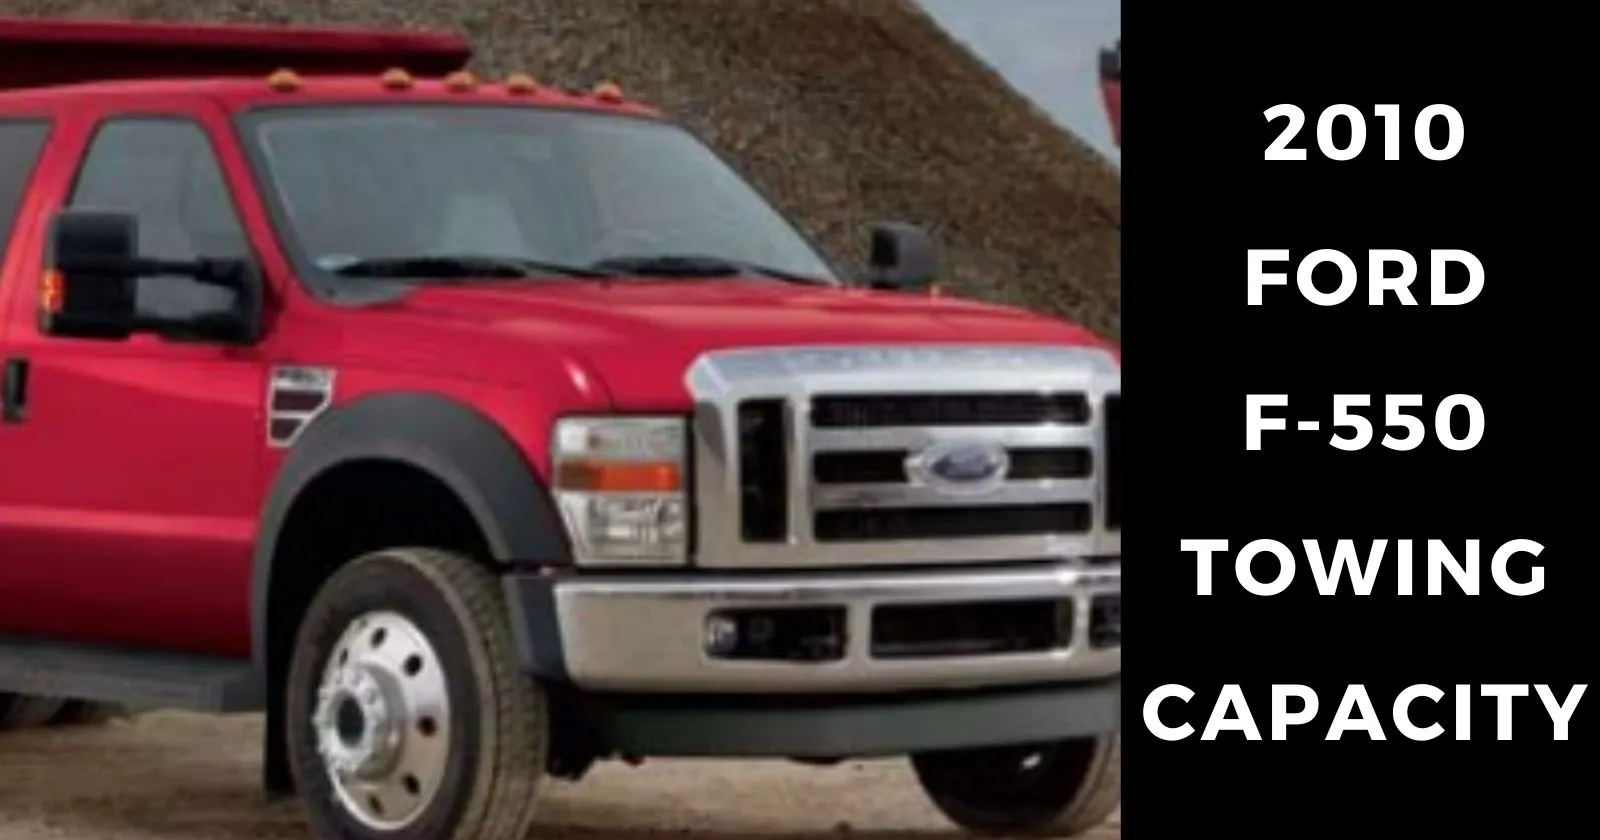 2010-ford-f550-towing-capacity-with-charts-thecartowing